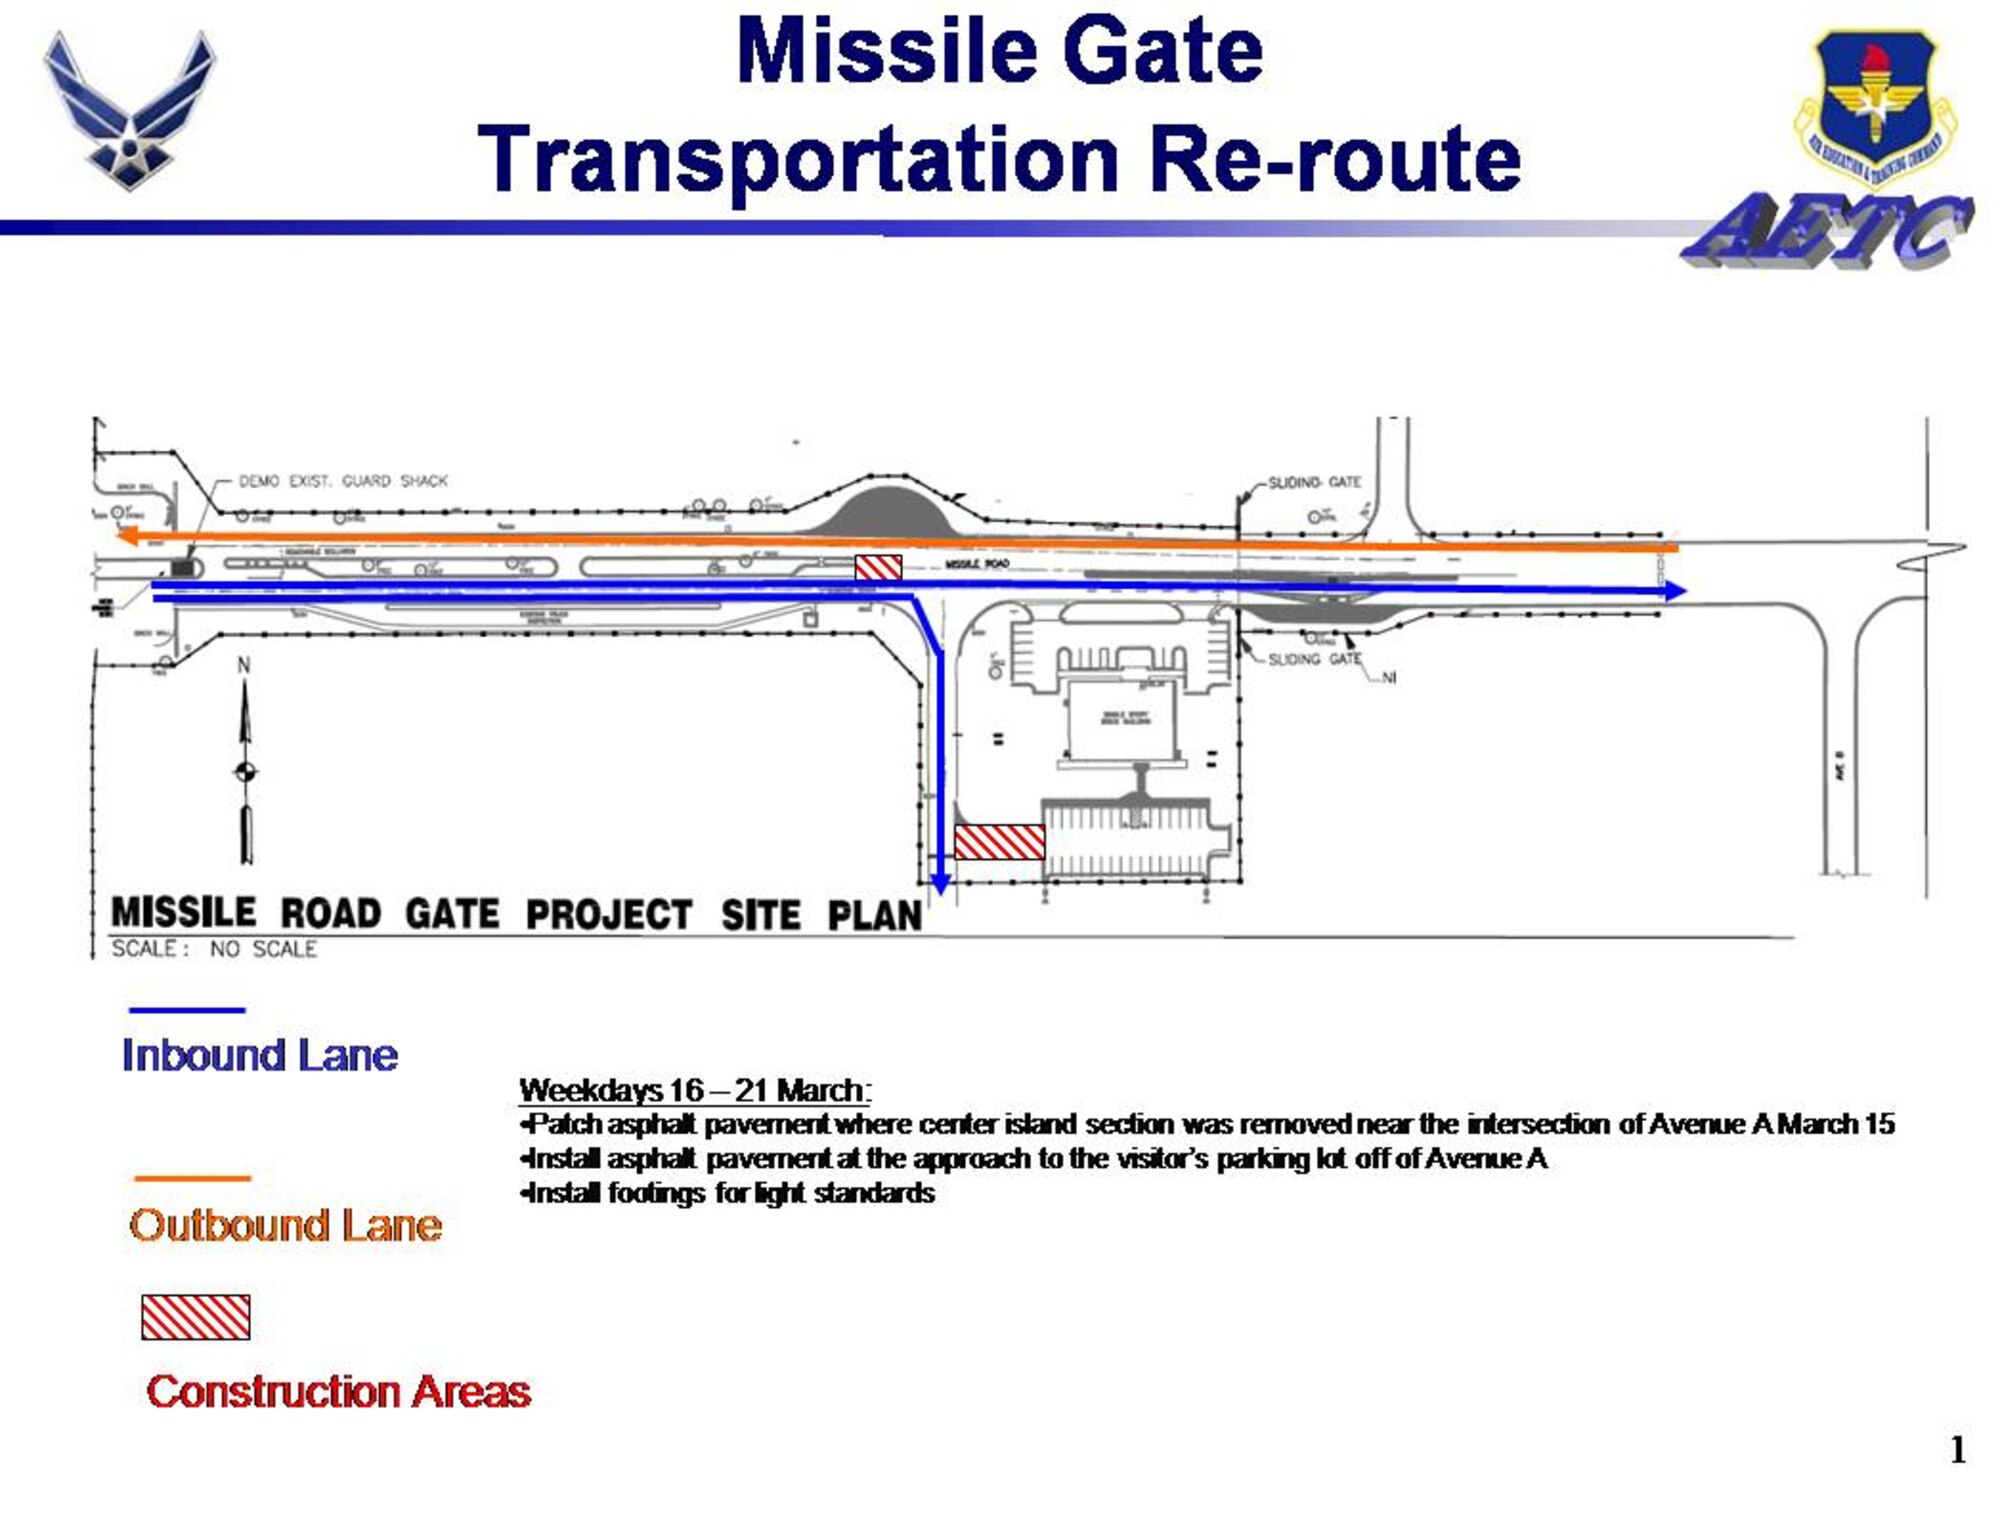 Construction crews will close down portions of Missile Road March 15 as part of the $450,000 project to relocate the visitor's center. Missile Road between Avenues A and B will be closed due to construction during the day, but the single inbound lane will re-open that evening. (U.S. Air Force graphic)